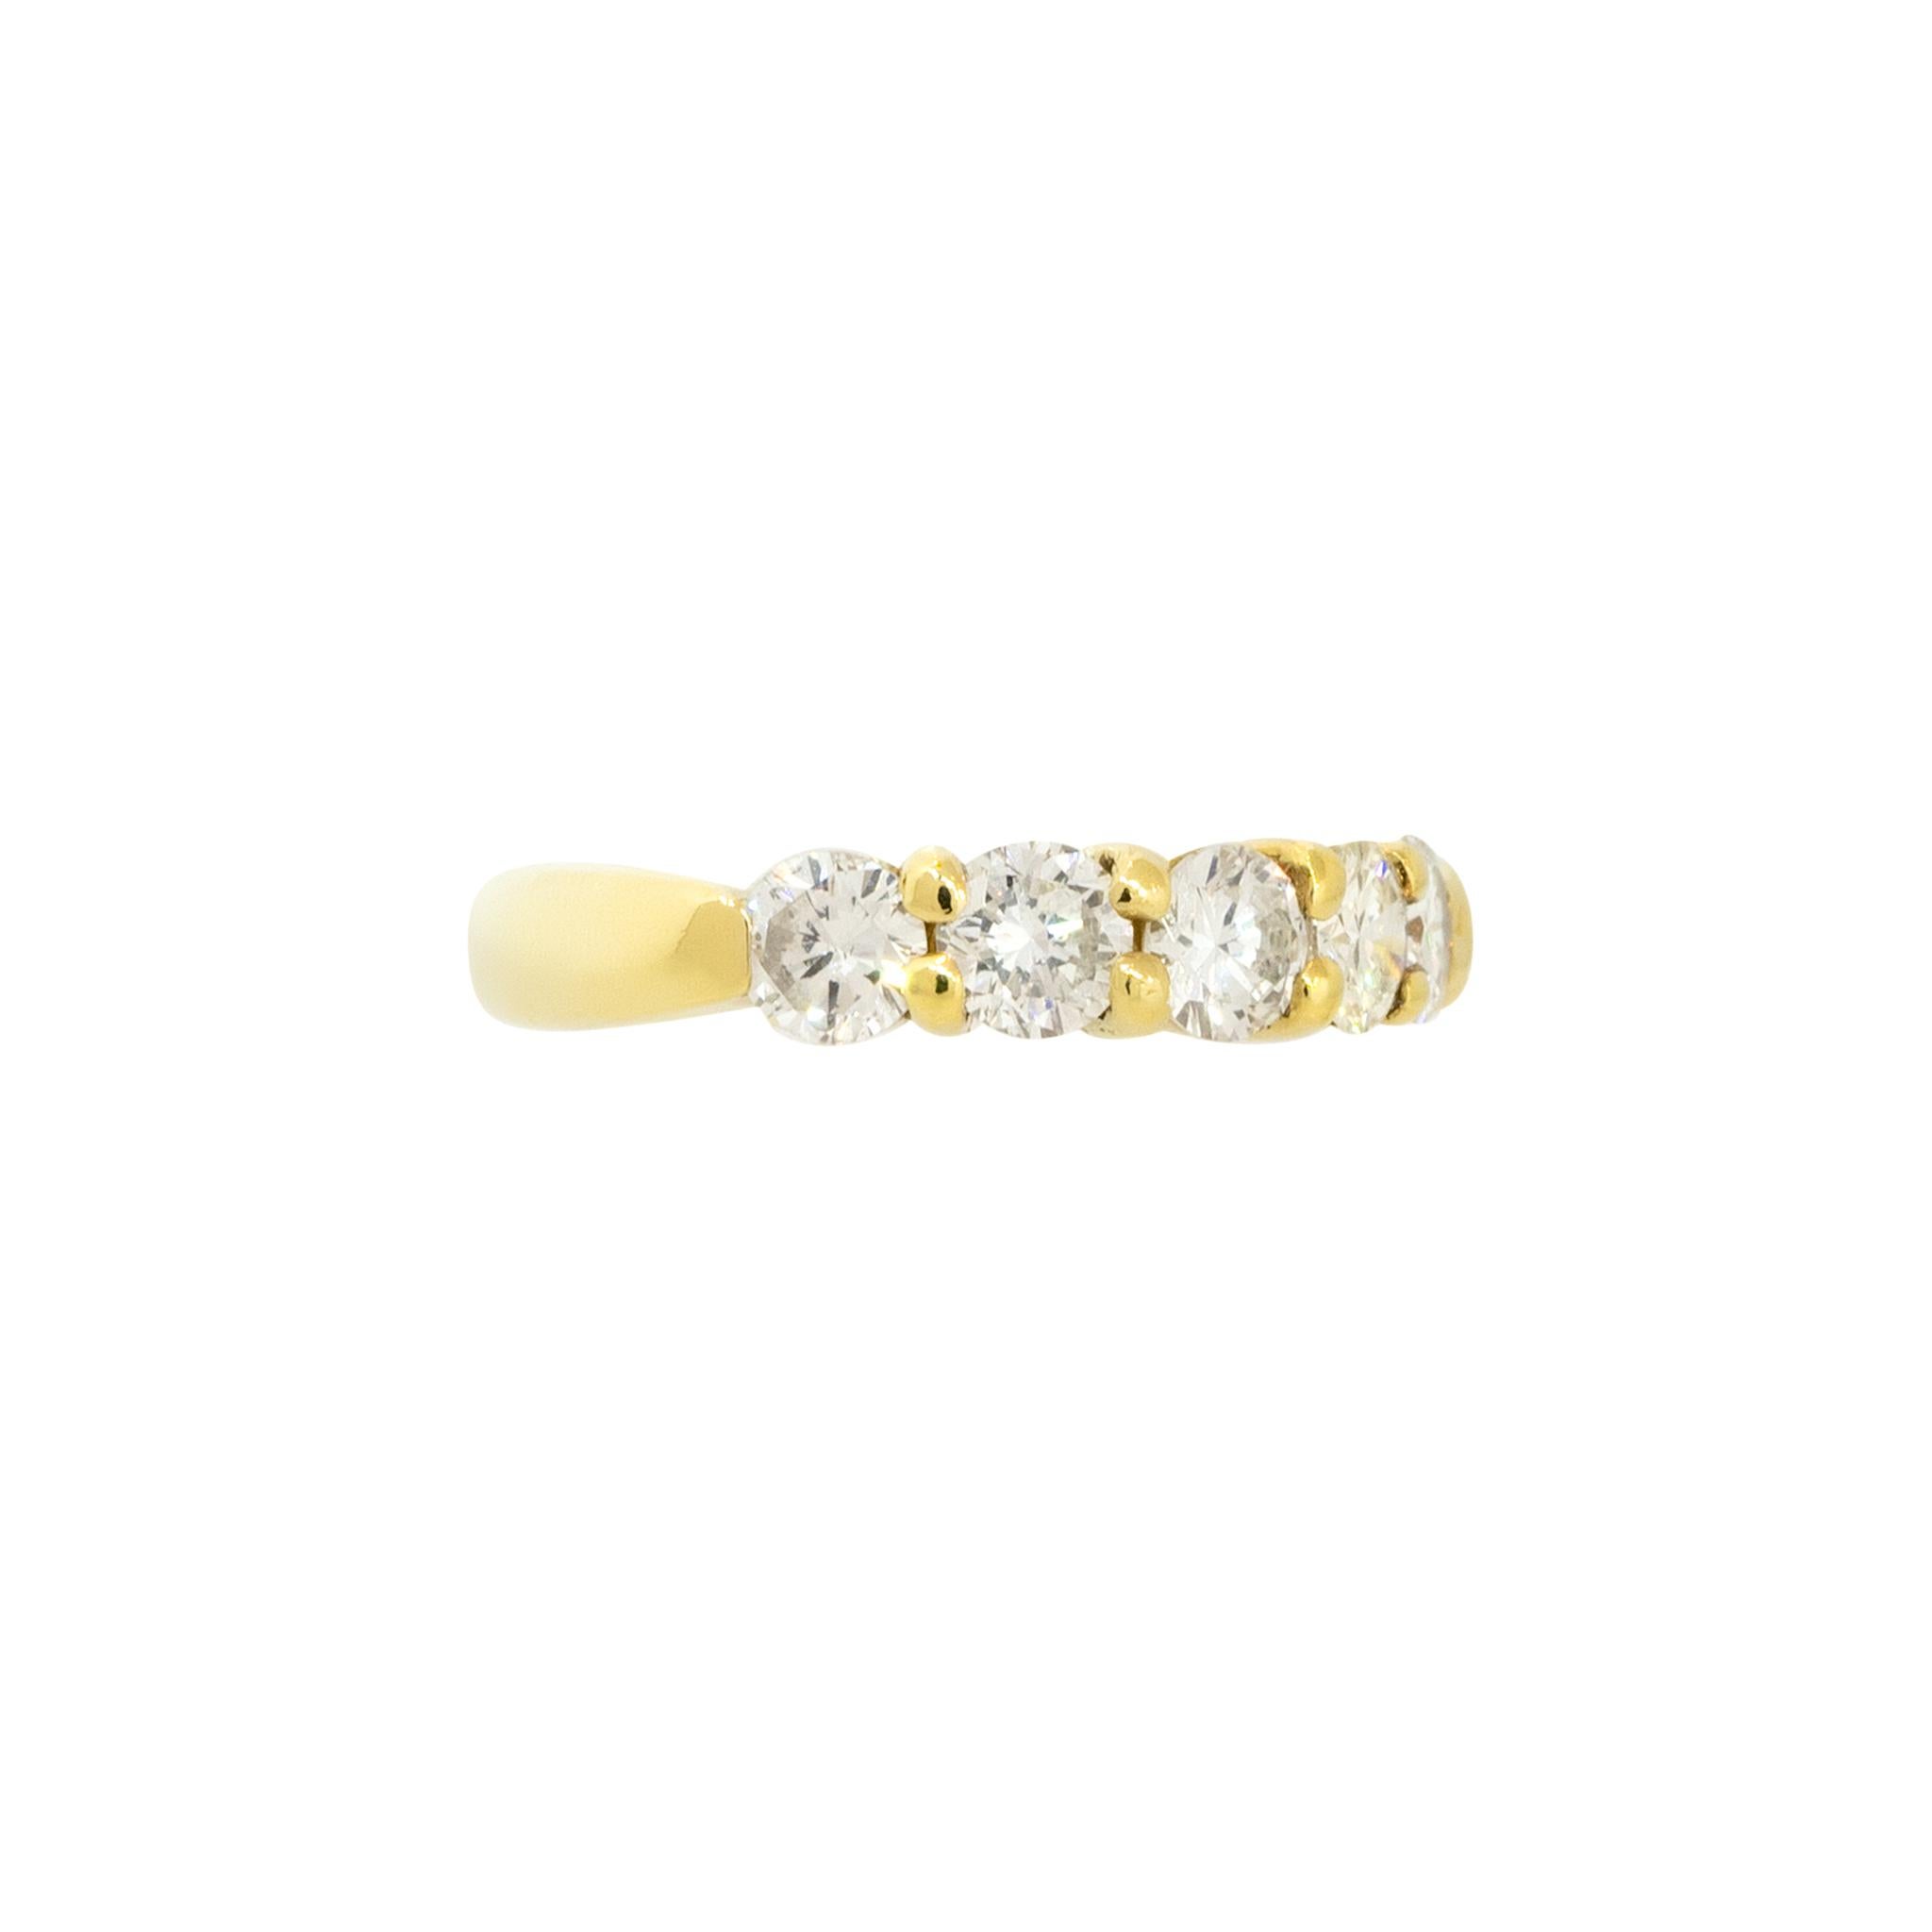 18k Yellow Gold 1.10ctw 5 Diamond Bridal Band Ring

Raymond Lee Jewelers in Boca Raton -- South Florida’s destination for diamonds, fine jewelry, antique jewelry, estate pieces, and vintage jewels.

Style: Women's 5 Diamond Bridal Band